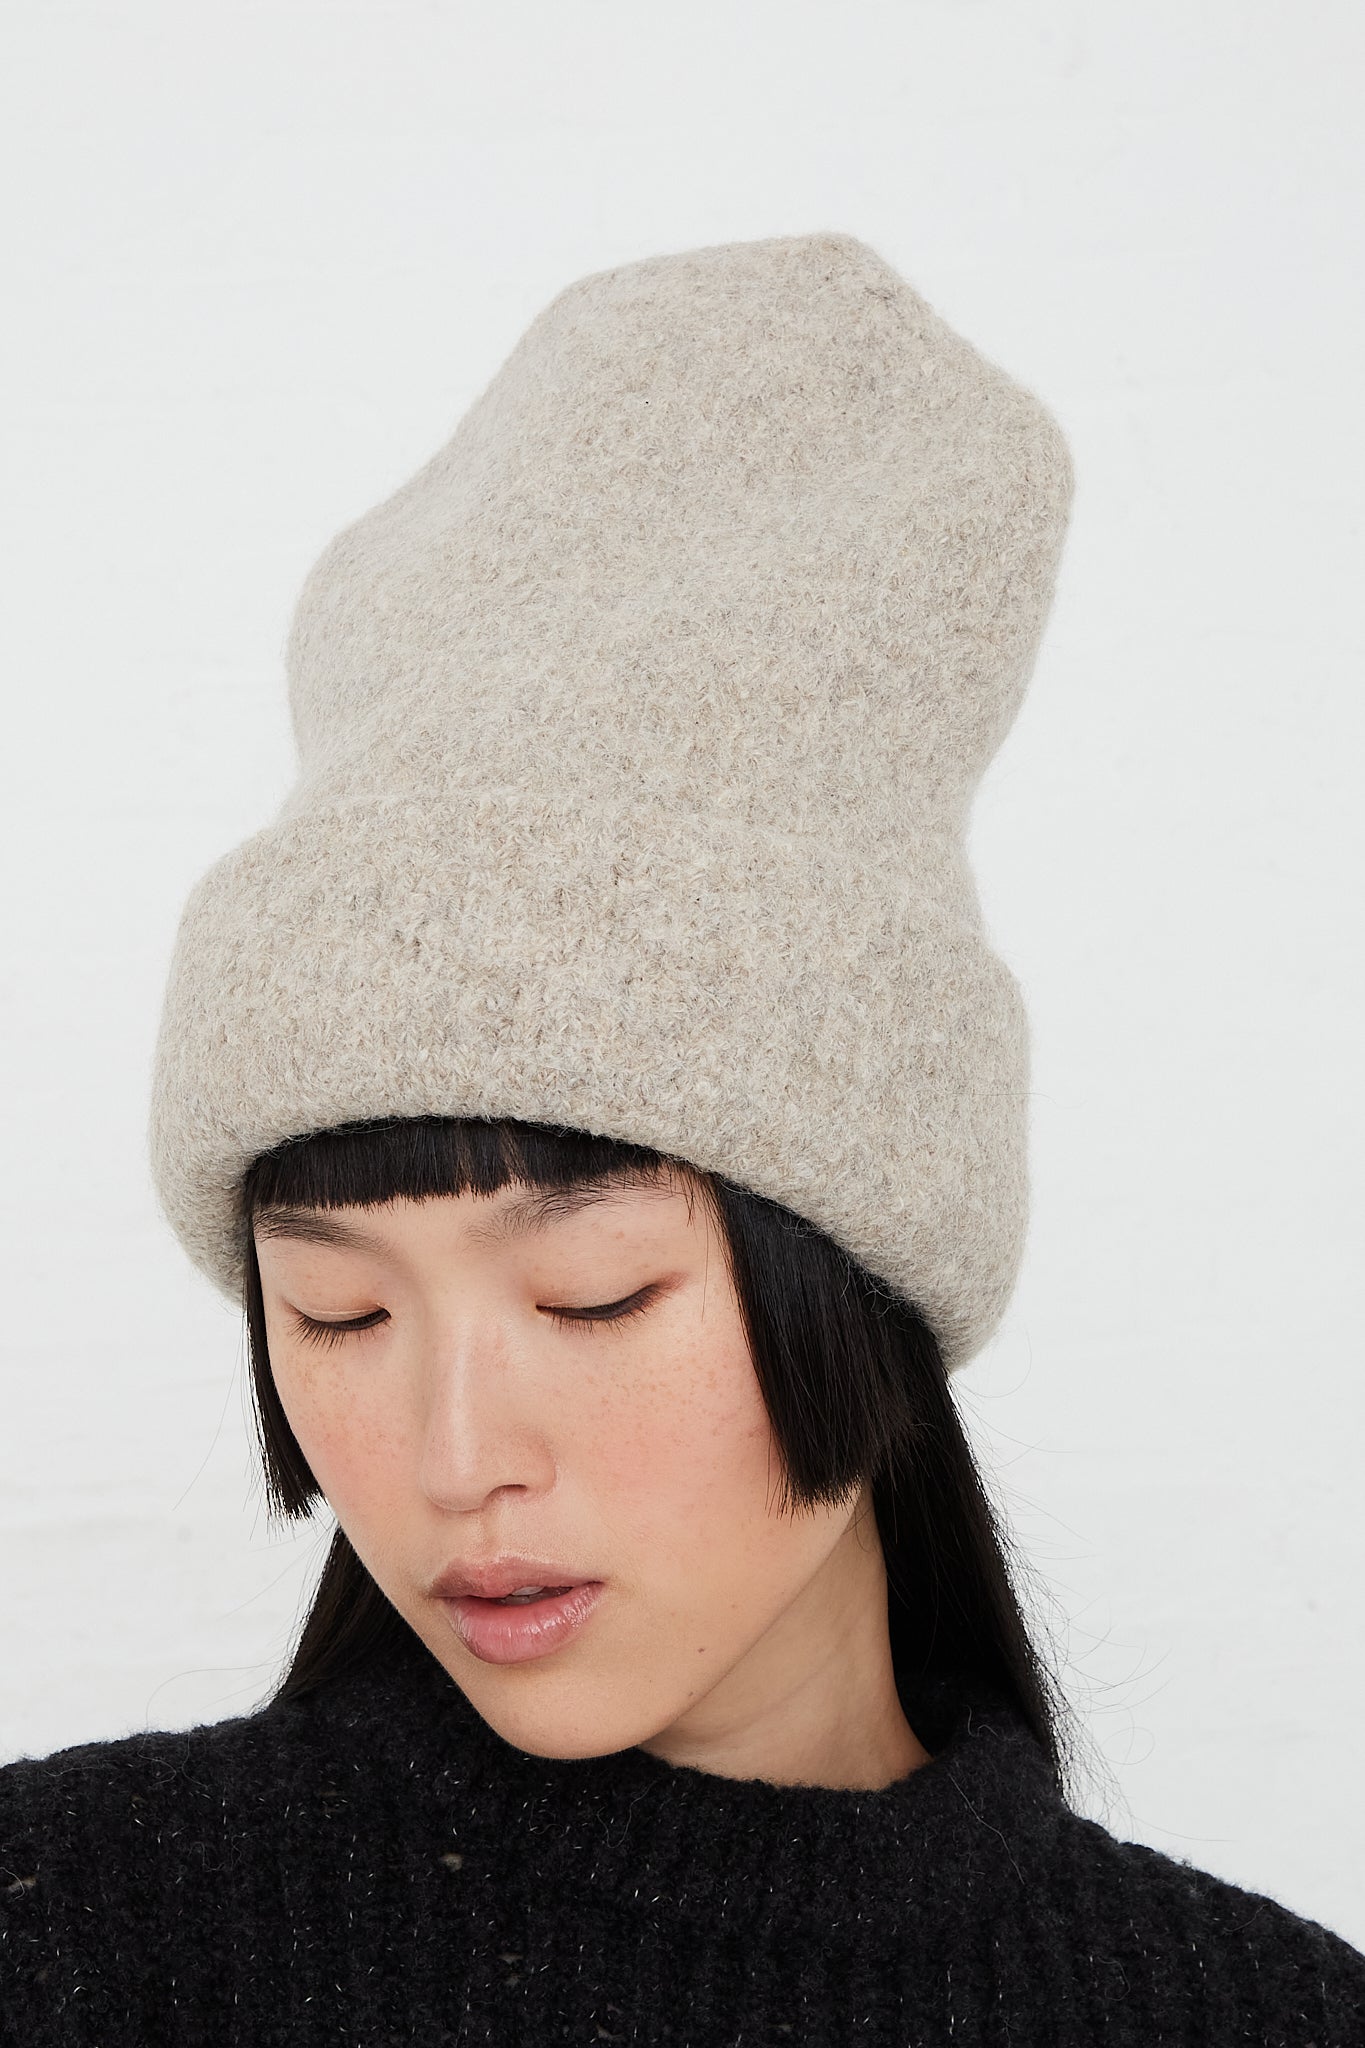 Alpaca Knit Carpenter Hat in Pebble by Lauren Manoogian for Oroboro Front Upclose